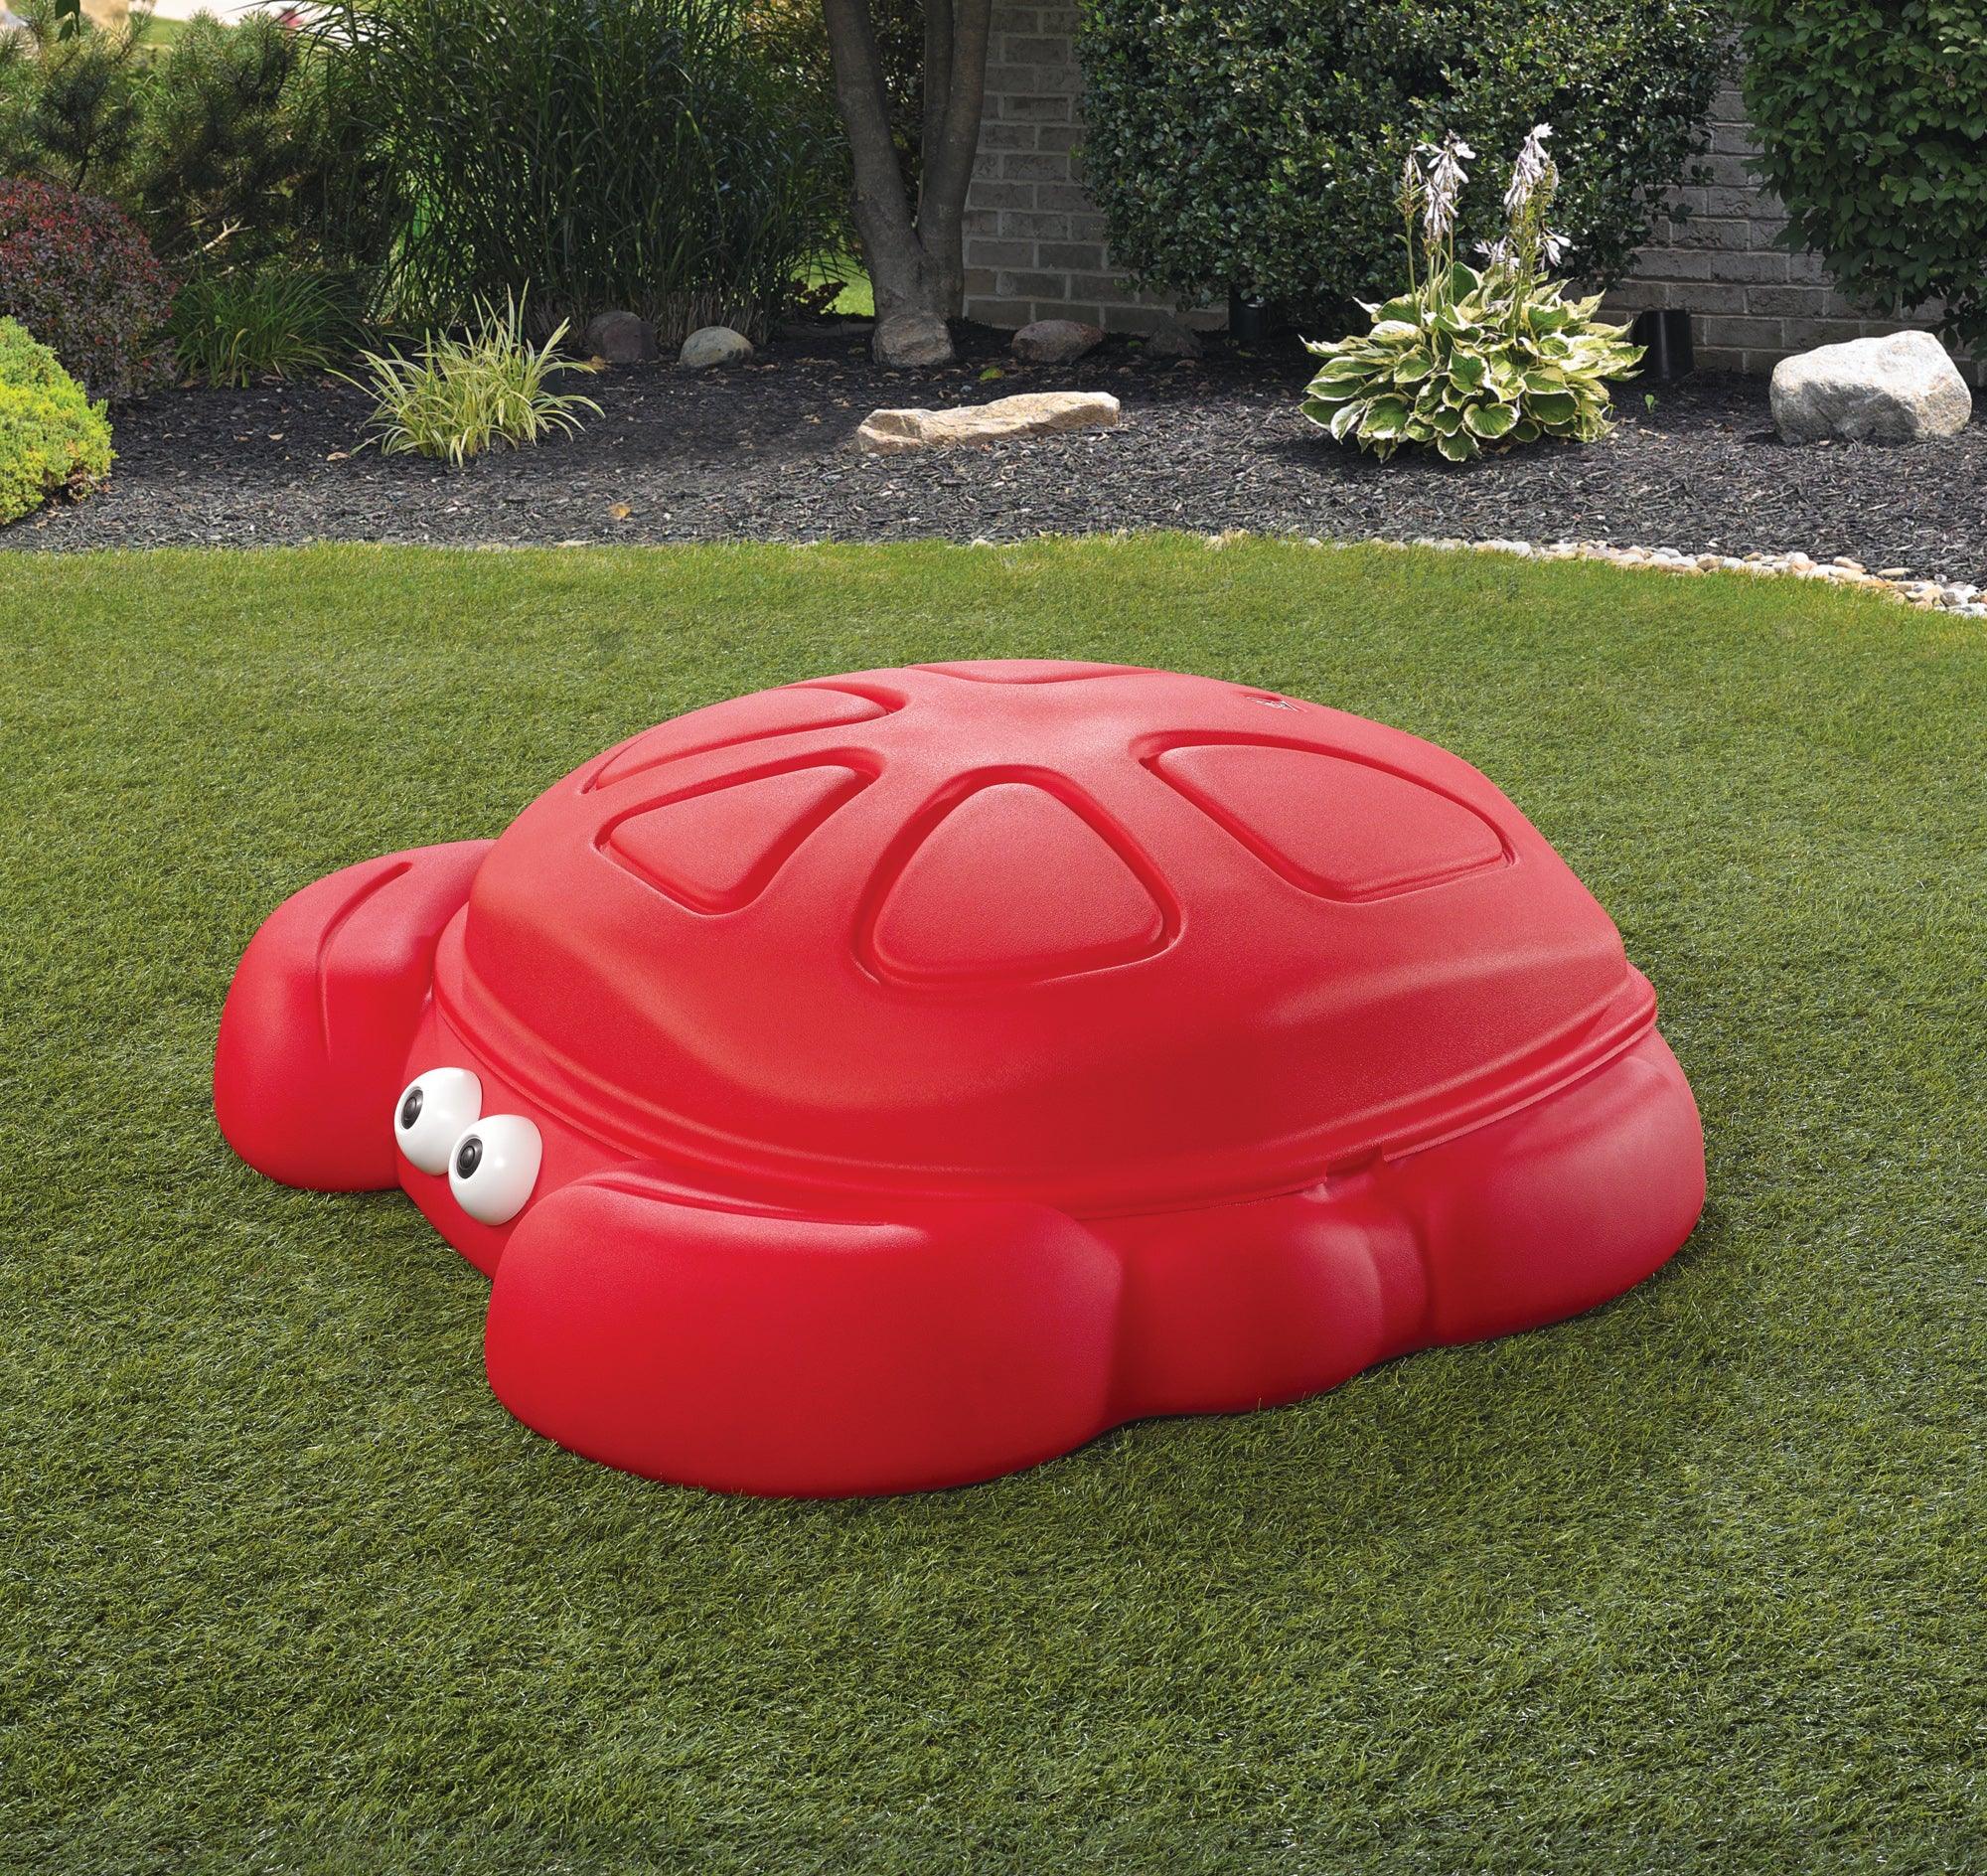 Step2 Crabbie Sandbox With Outdoor Cover Play Pen for Kids - FunCorp India